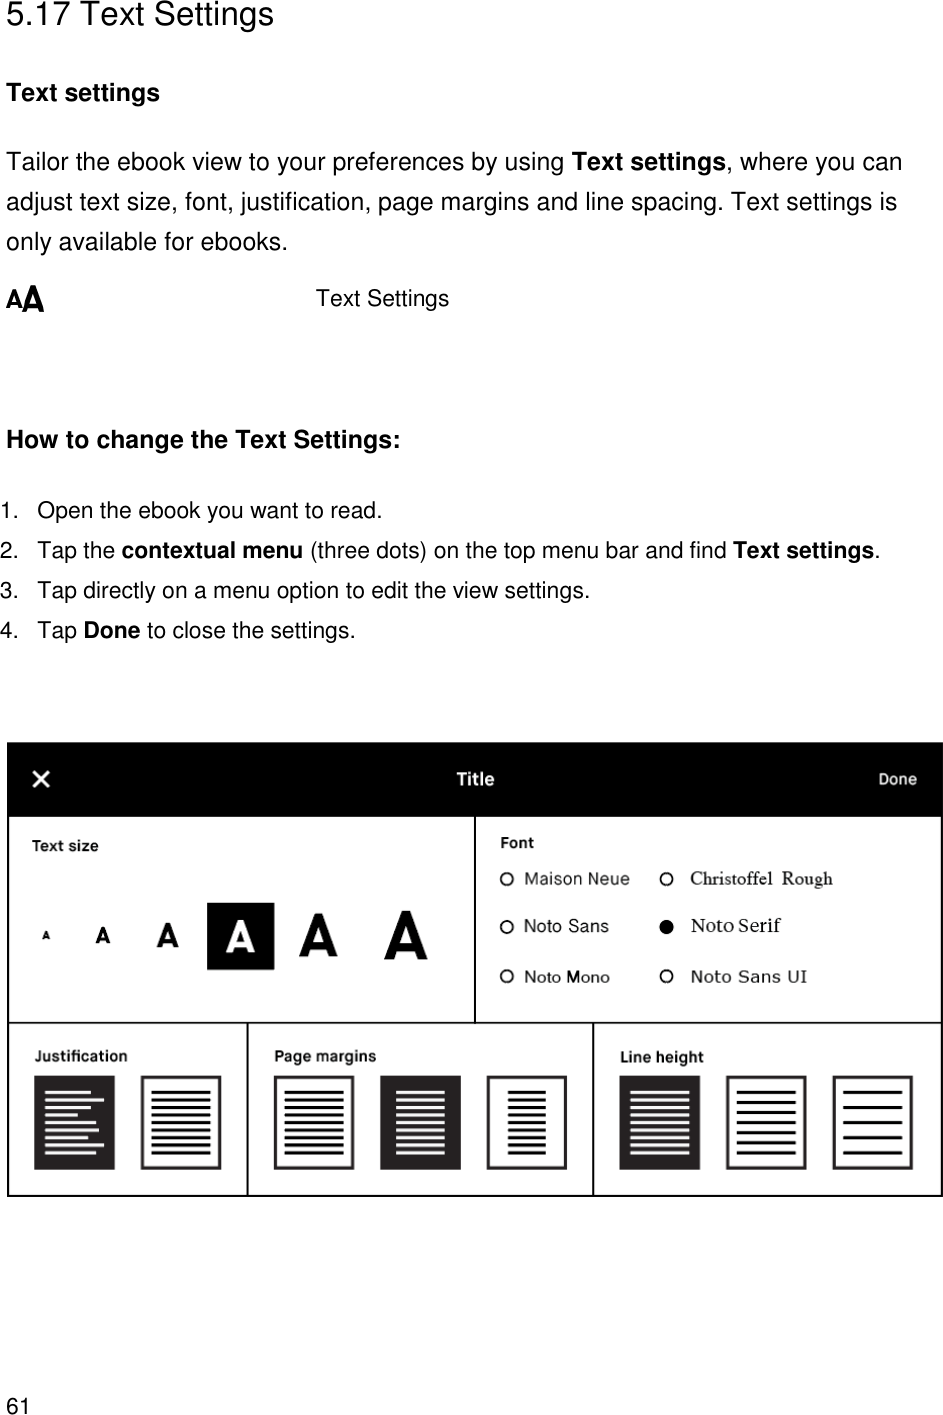 61     5.17 Text Settings  Text settings Tailor the ebook view to your preferences by using Text settings, where you can adjust text size, font, justification, page margins and line spacing. Text settings is only available for ebooks.          Text Settings    How to change the Text Settings: 1.  Open the ebook you want to read. 2.  Tap the contextual menu (three dots) on the top menu bar and find Text settings. 3.  Tap directly on a menu option to edit the view settings. 4.  Tap Done to close the settings.        